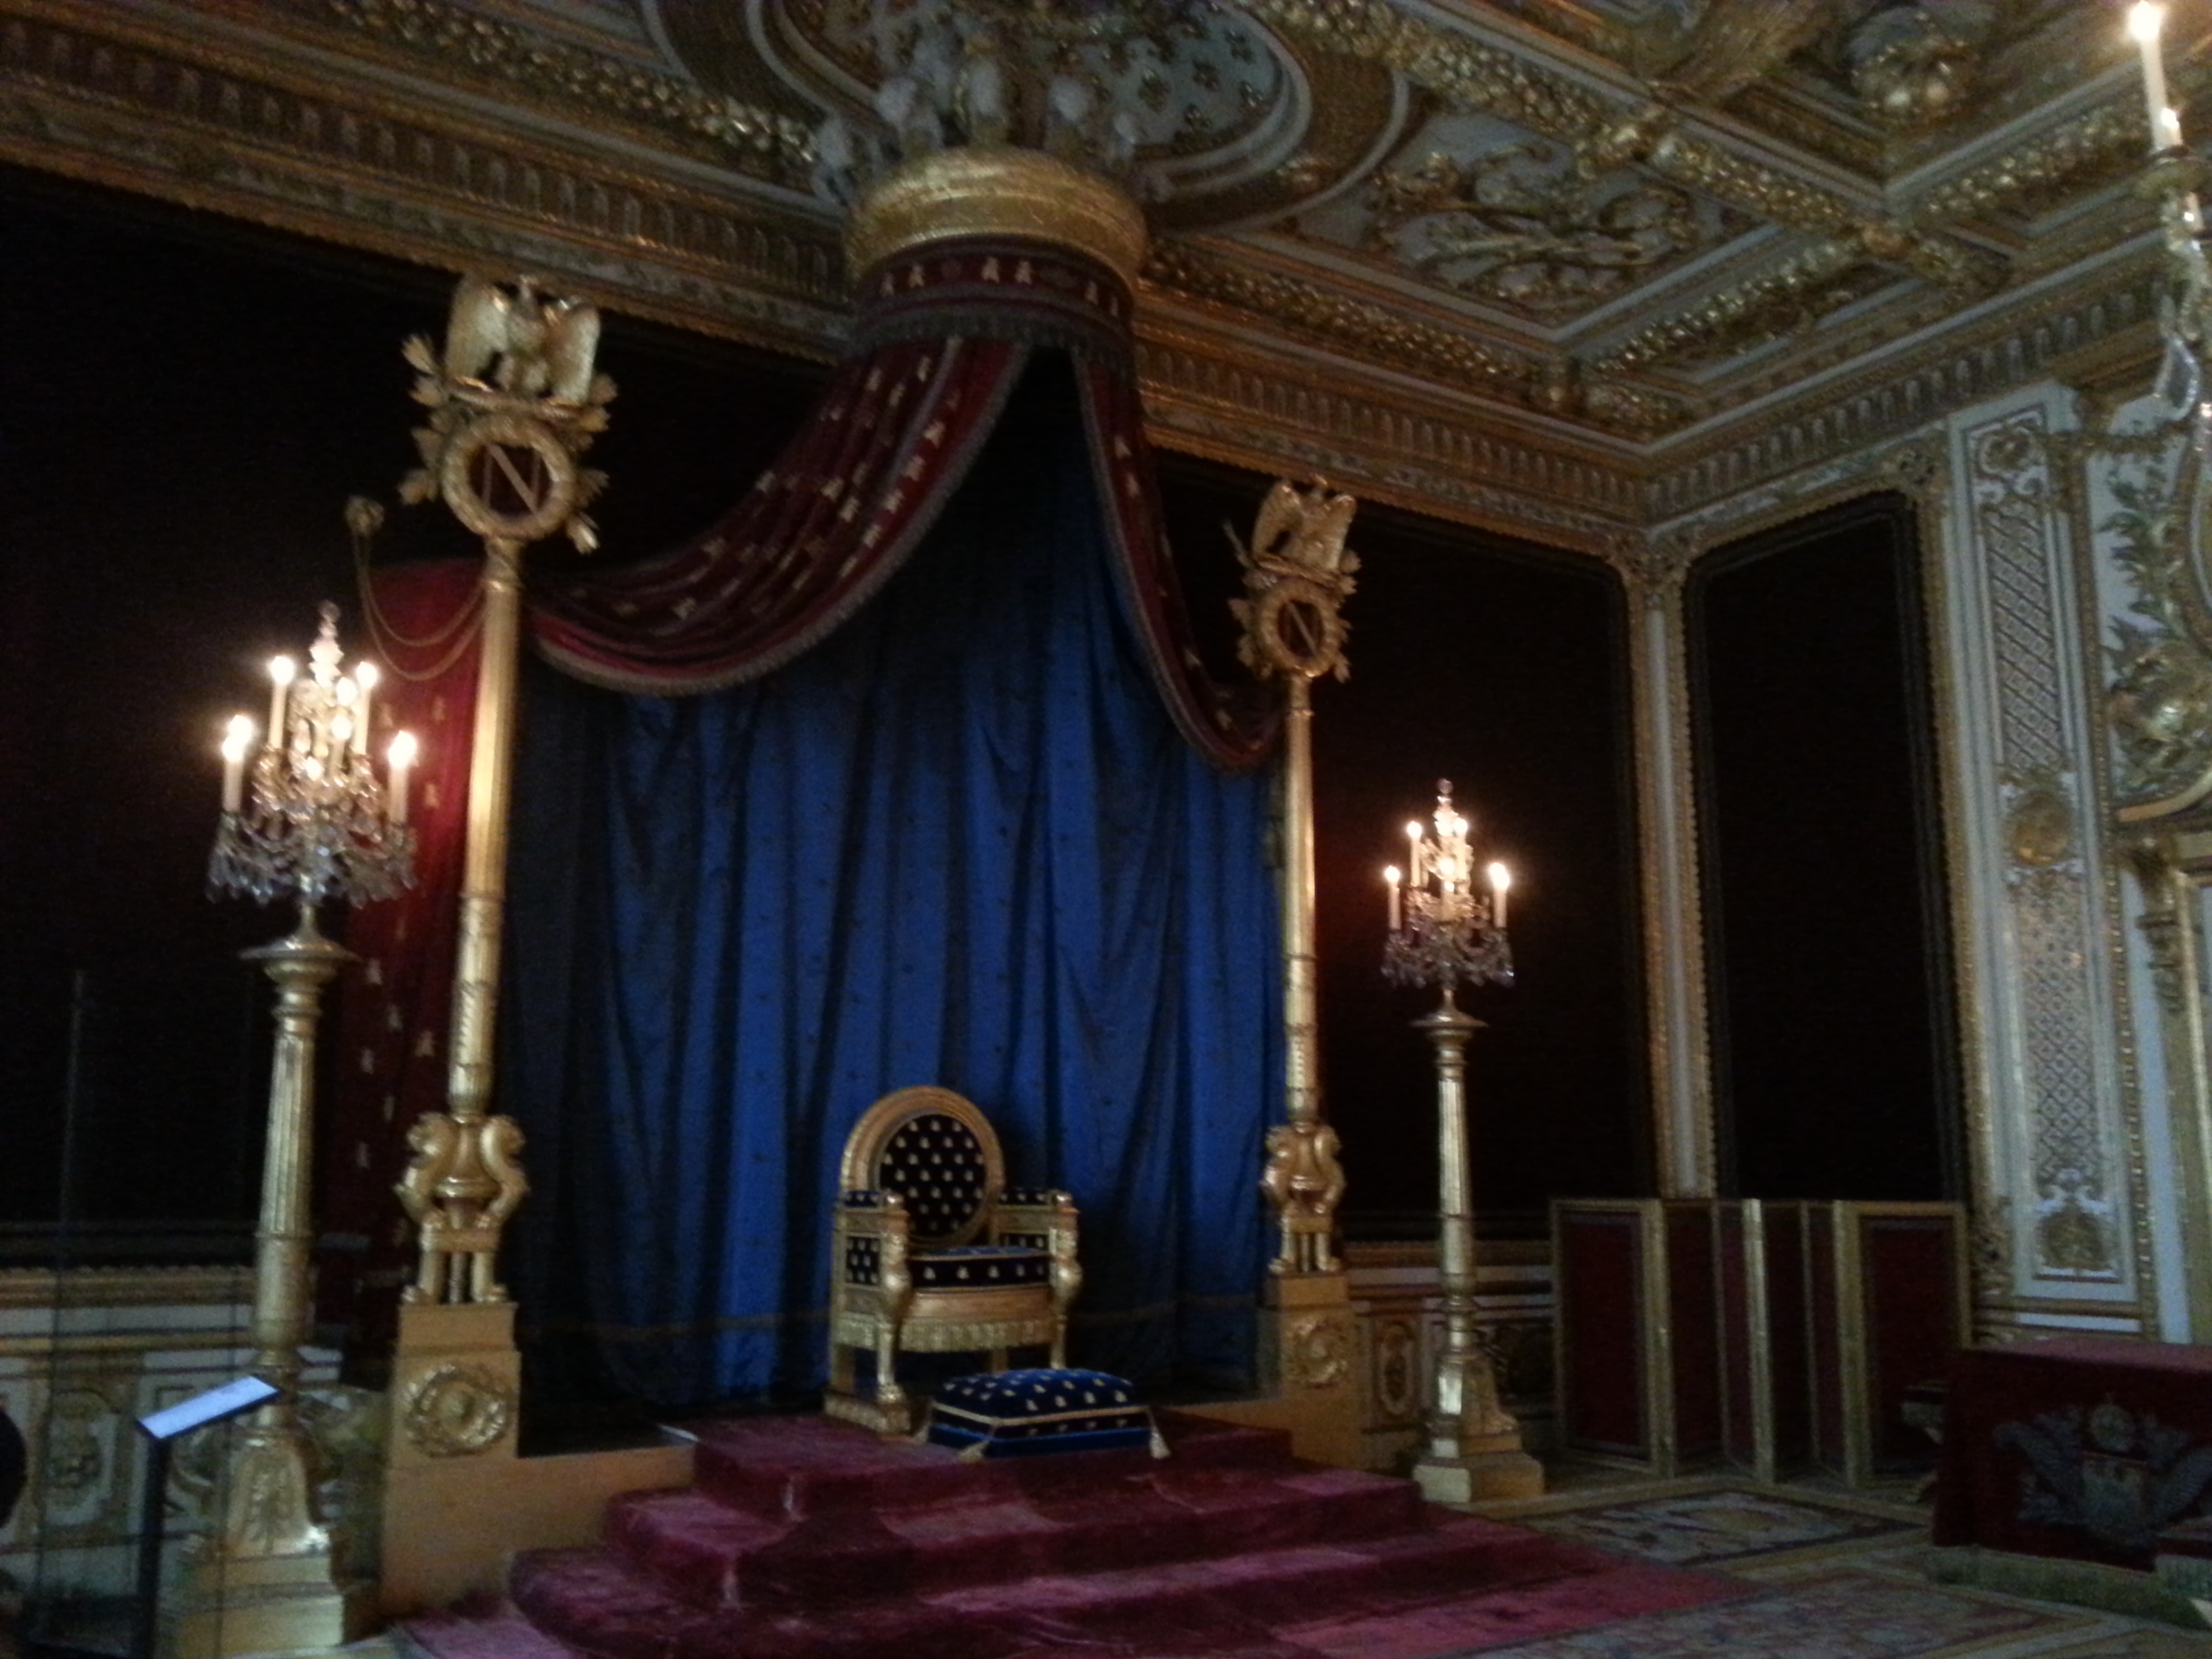 File:Throne of Napoleon, in the throne room of Fontainebleau Palace.jpg -  Wikiquote